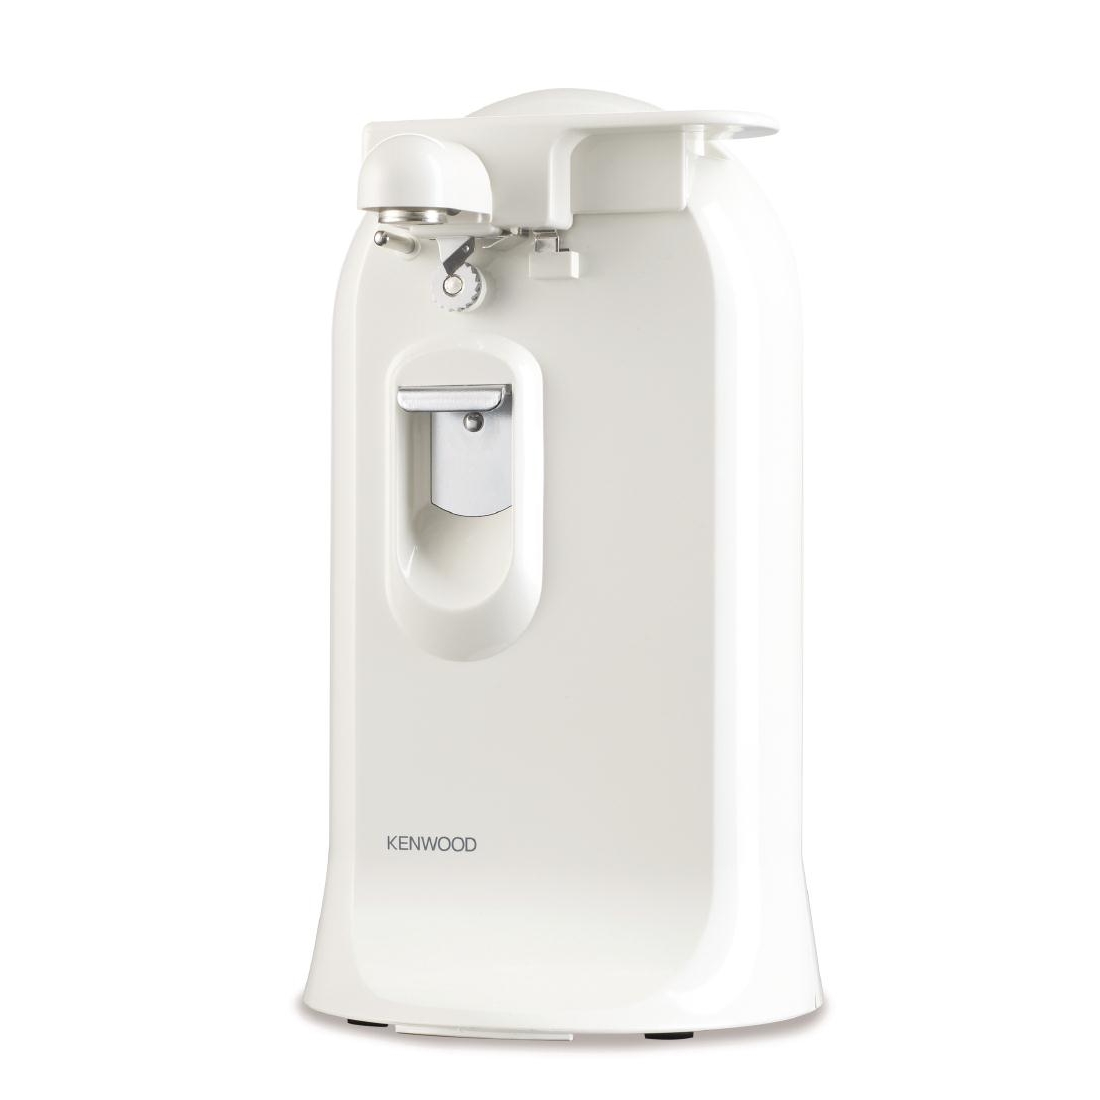 Kenwood 3 in 1 Can Opener White CO600 by Kenwood-GN677